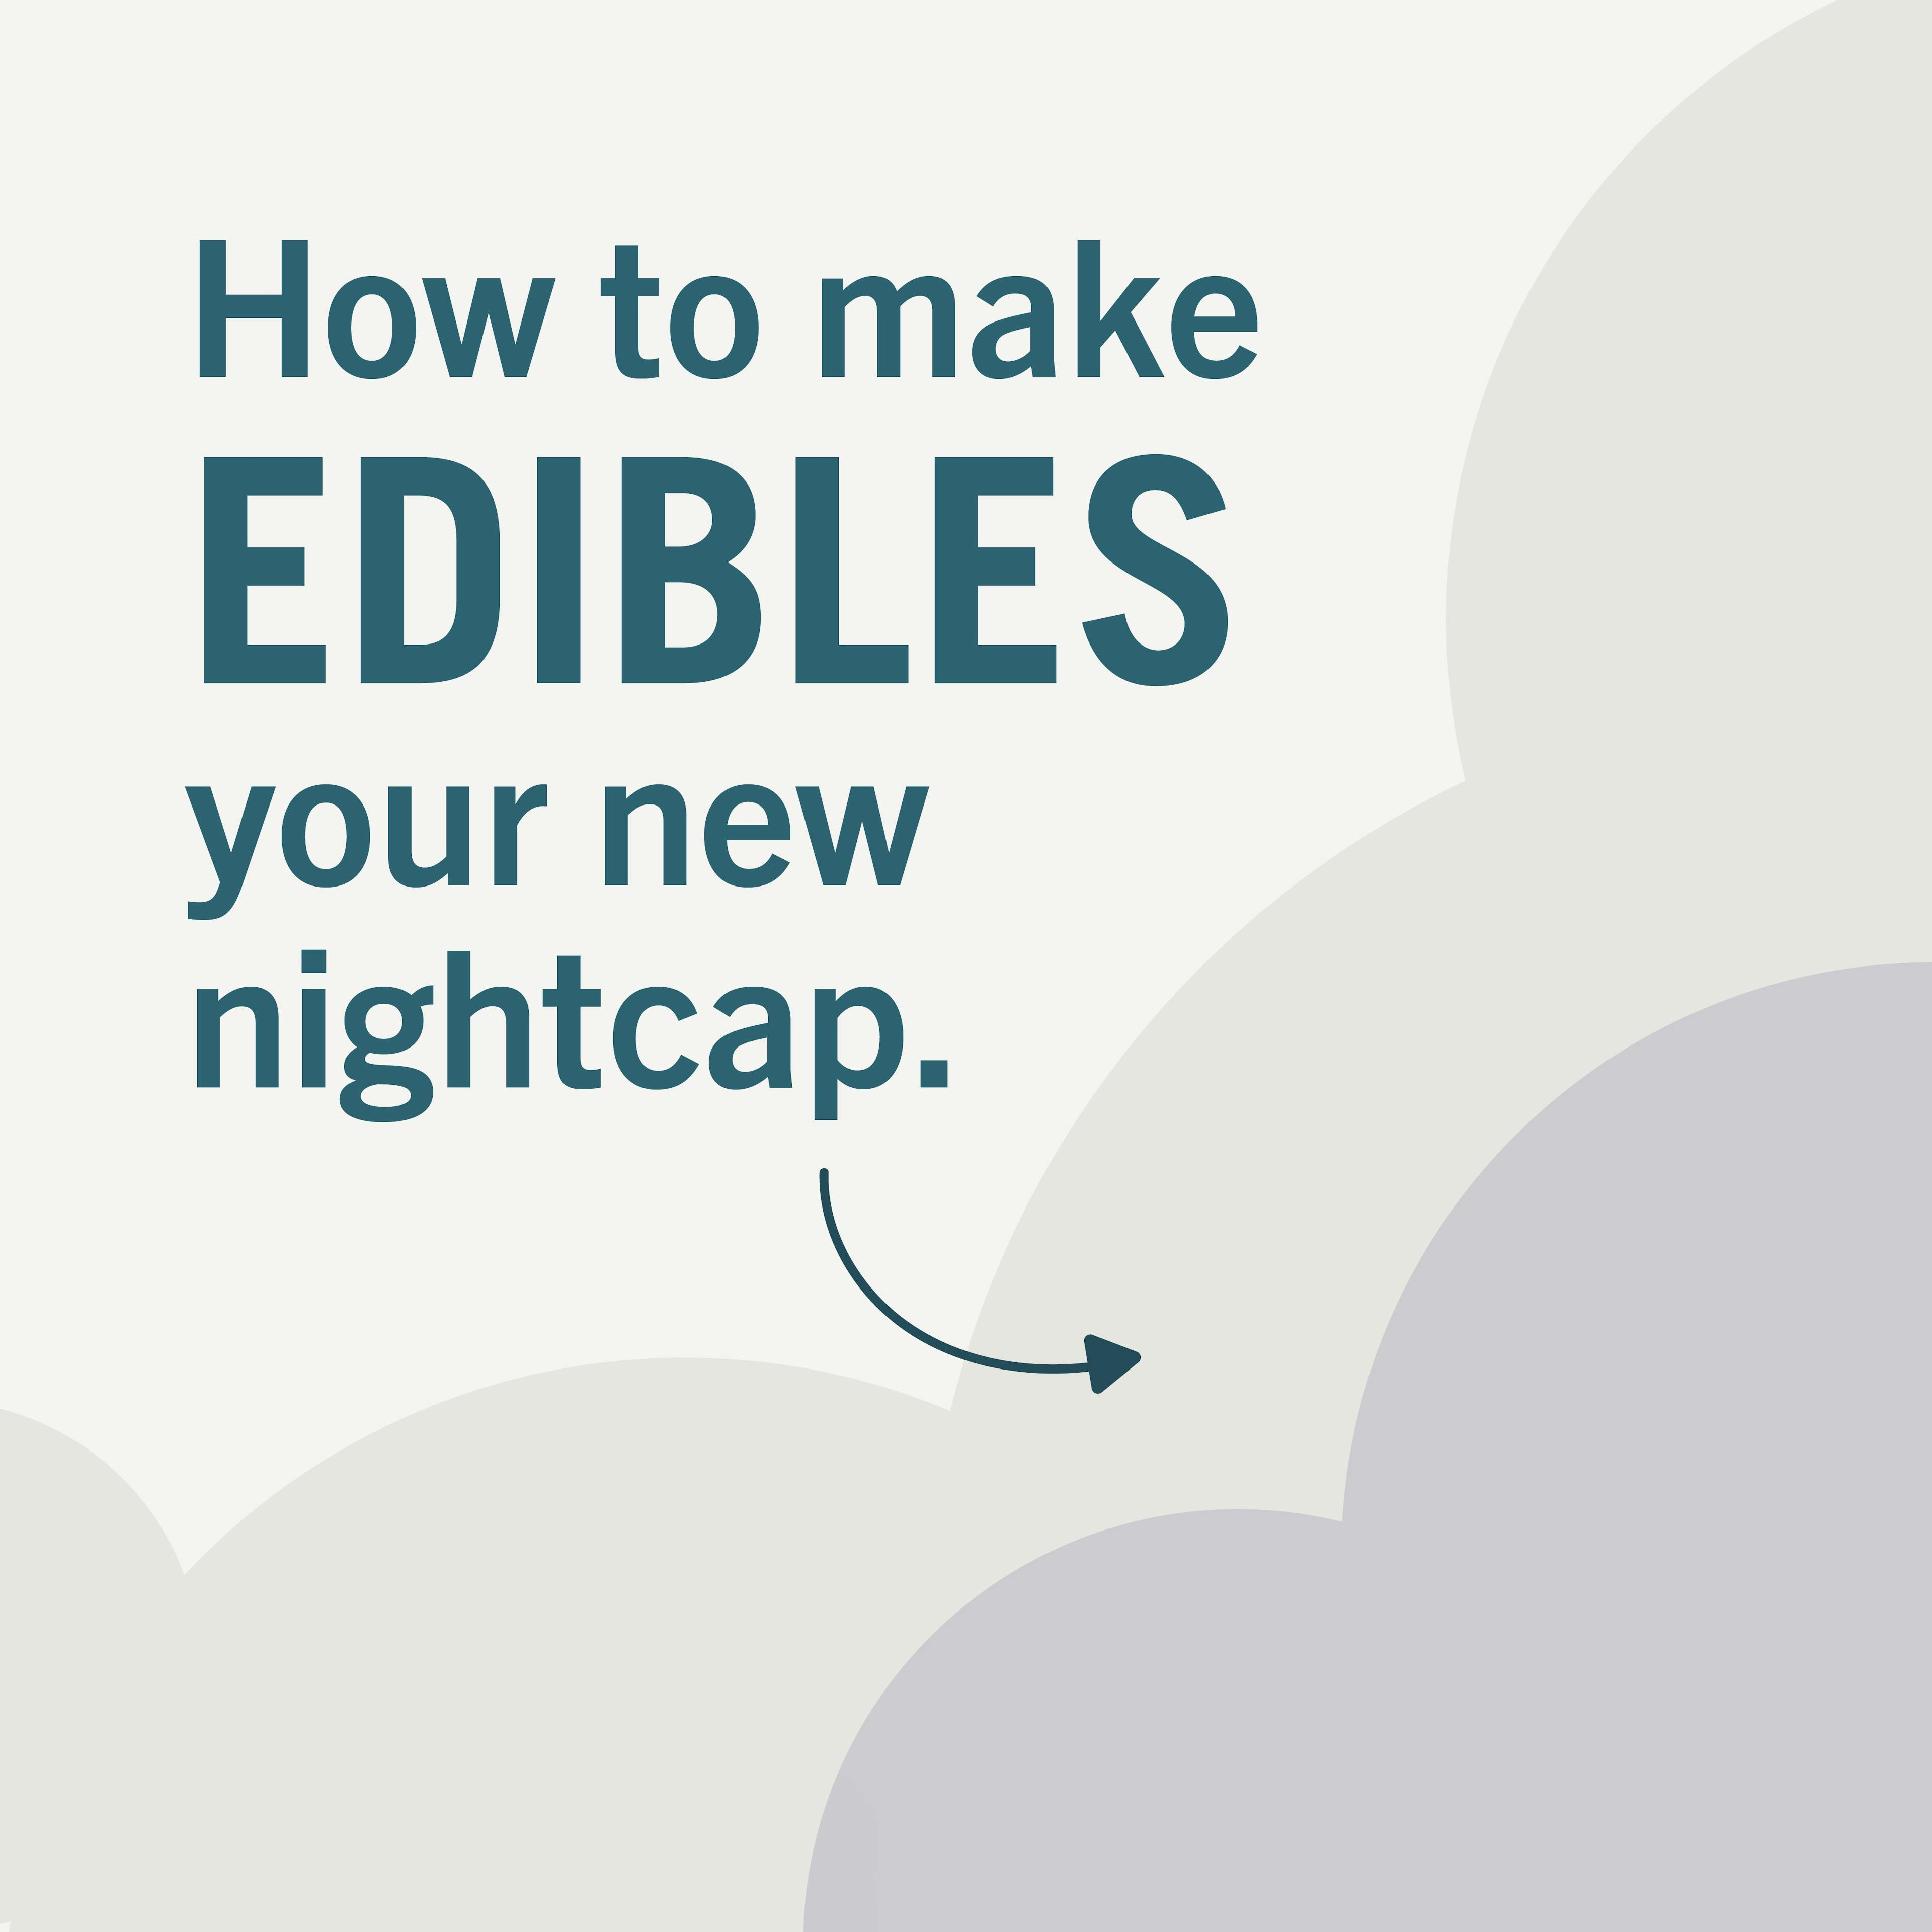 How to make Edibles you new nightcap.

1. Choose the right product: Oil-based products tend to be digested slower, so they can last longer. Also look for the THC with CBN, the cannabinoid with extra-sleepy properties.

2. Prepare your Routine: Since traditional edibles take a while to kick-in, try setting a timer 30-60 minutes ahead of bed to feel effects right as you doze off.

3. Always Start Slow: Remember, a little goes a long way. Start with a small dose (if a gummy, try cutting into segements), see how the night goes, then adjust as needed.

Ready for bed? We might be dreaming up something sweet soon ...
